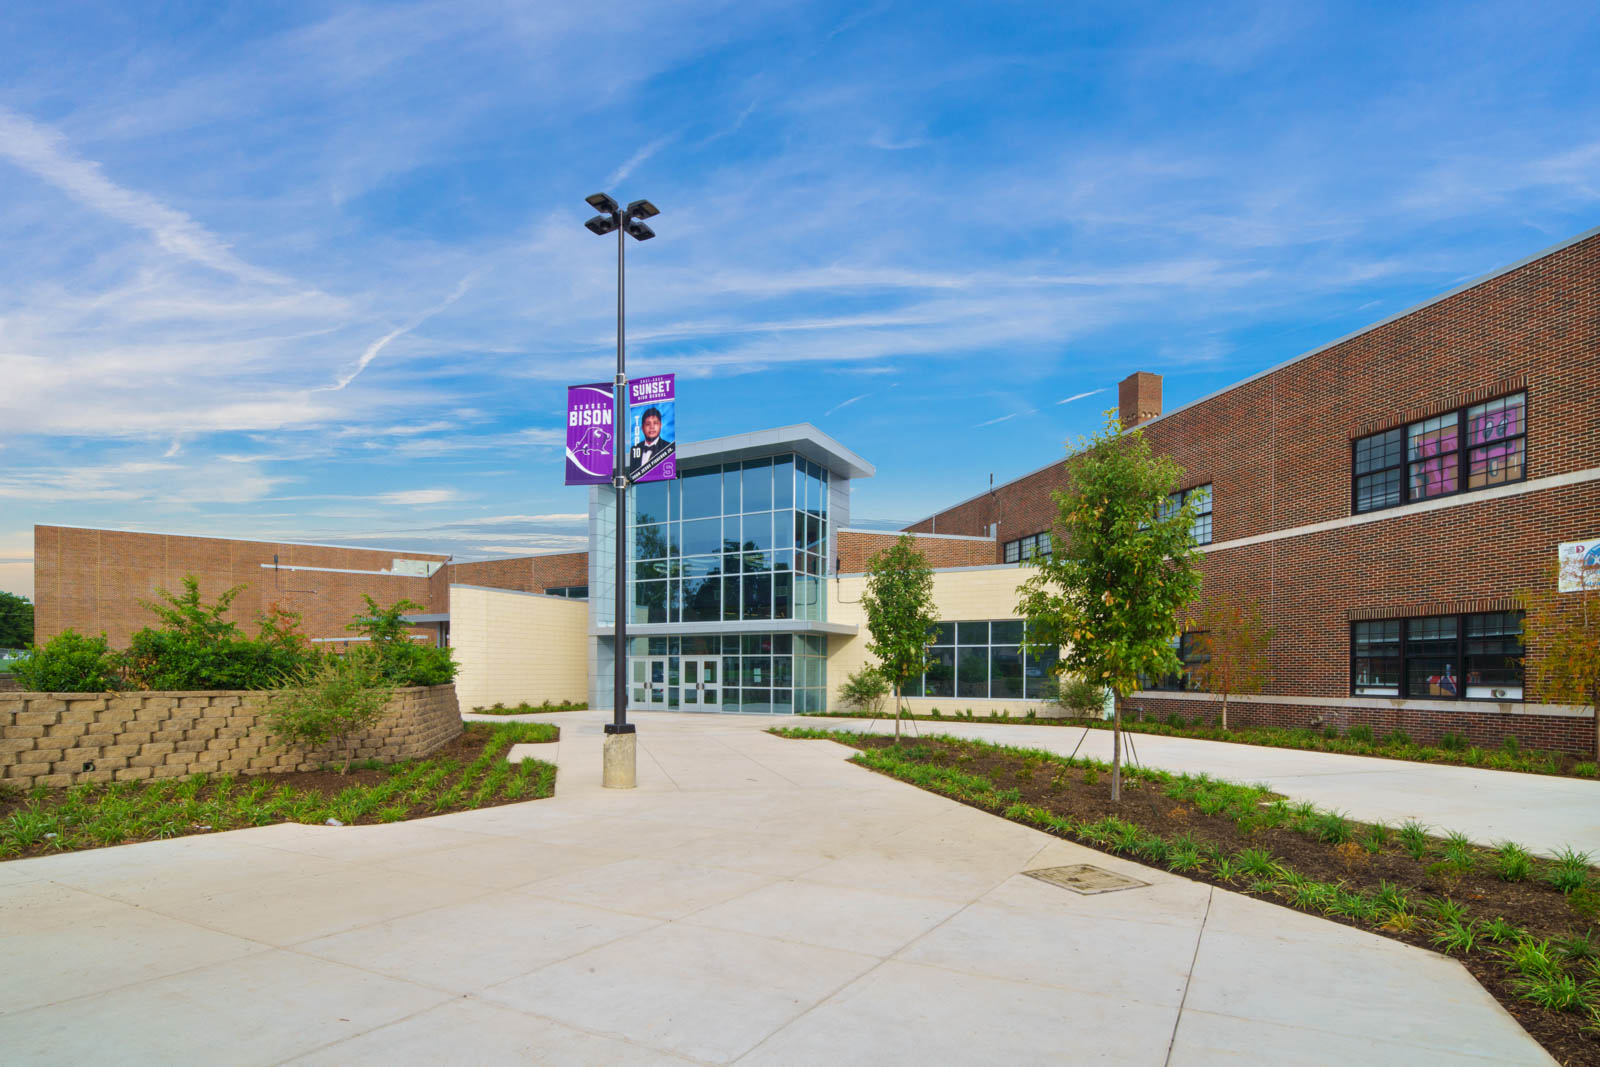 Cadence McShane – Morales Construction Services Joint Venture Completes Renovation and Additions to Sunset High School in Dallas ISD